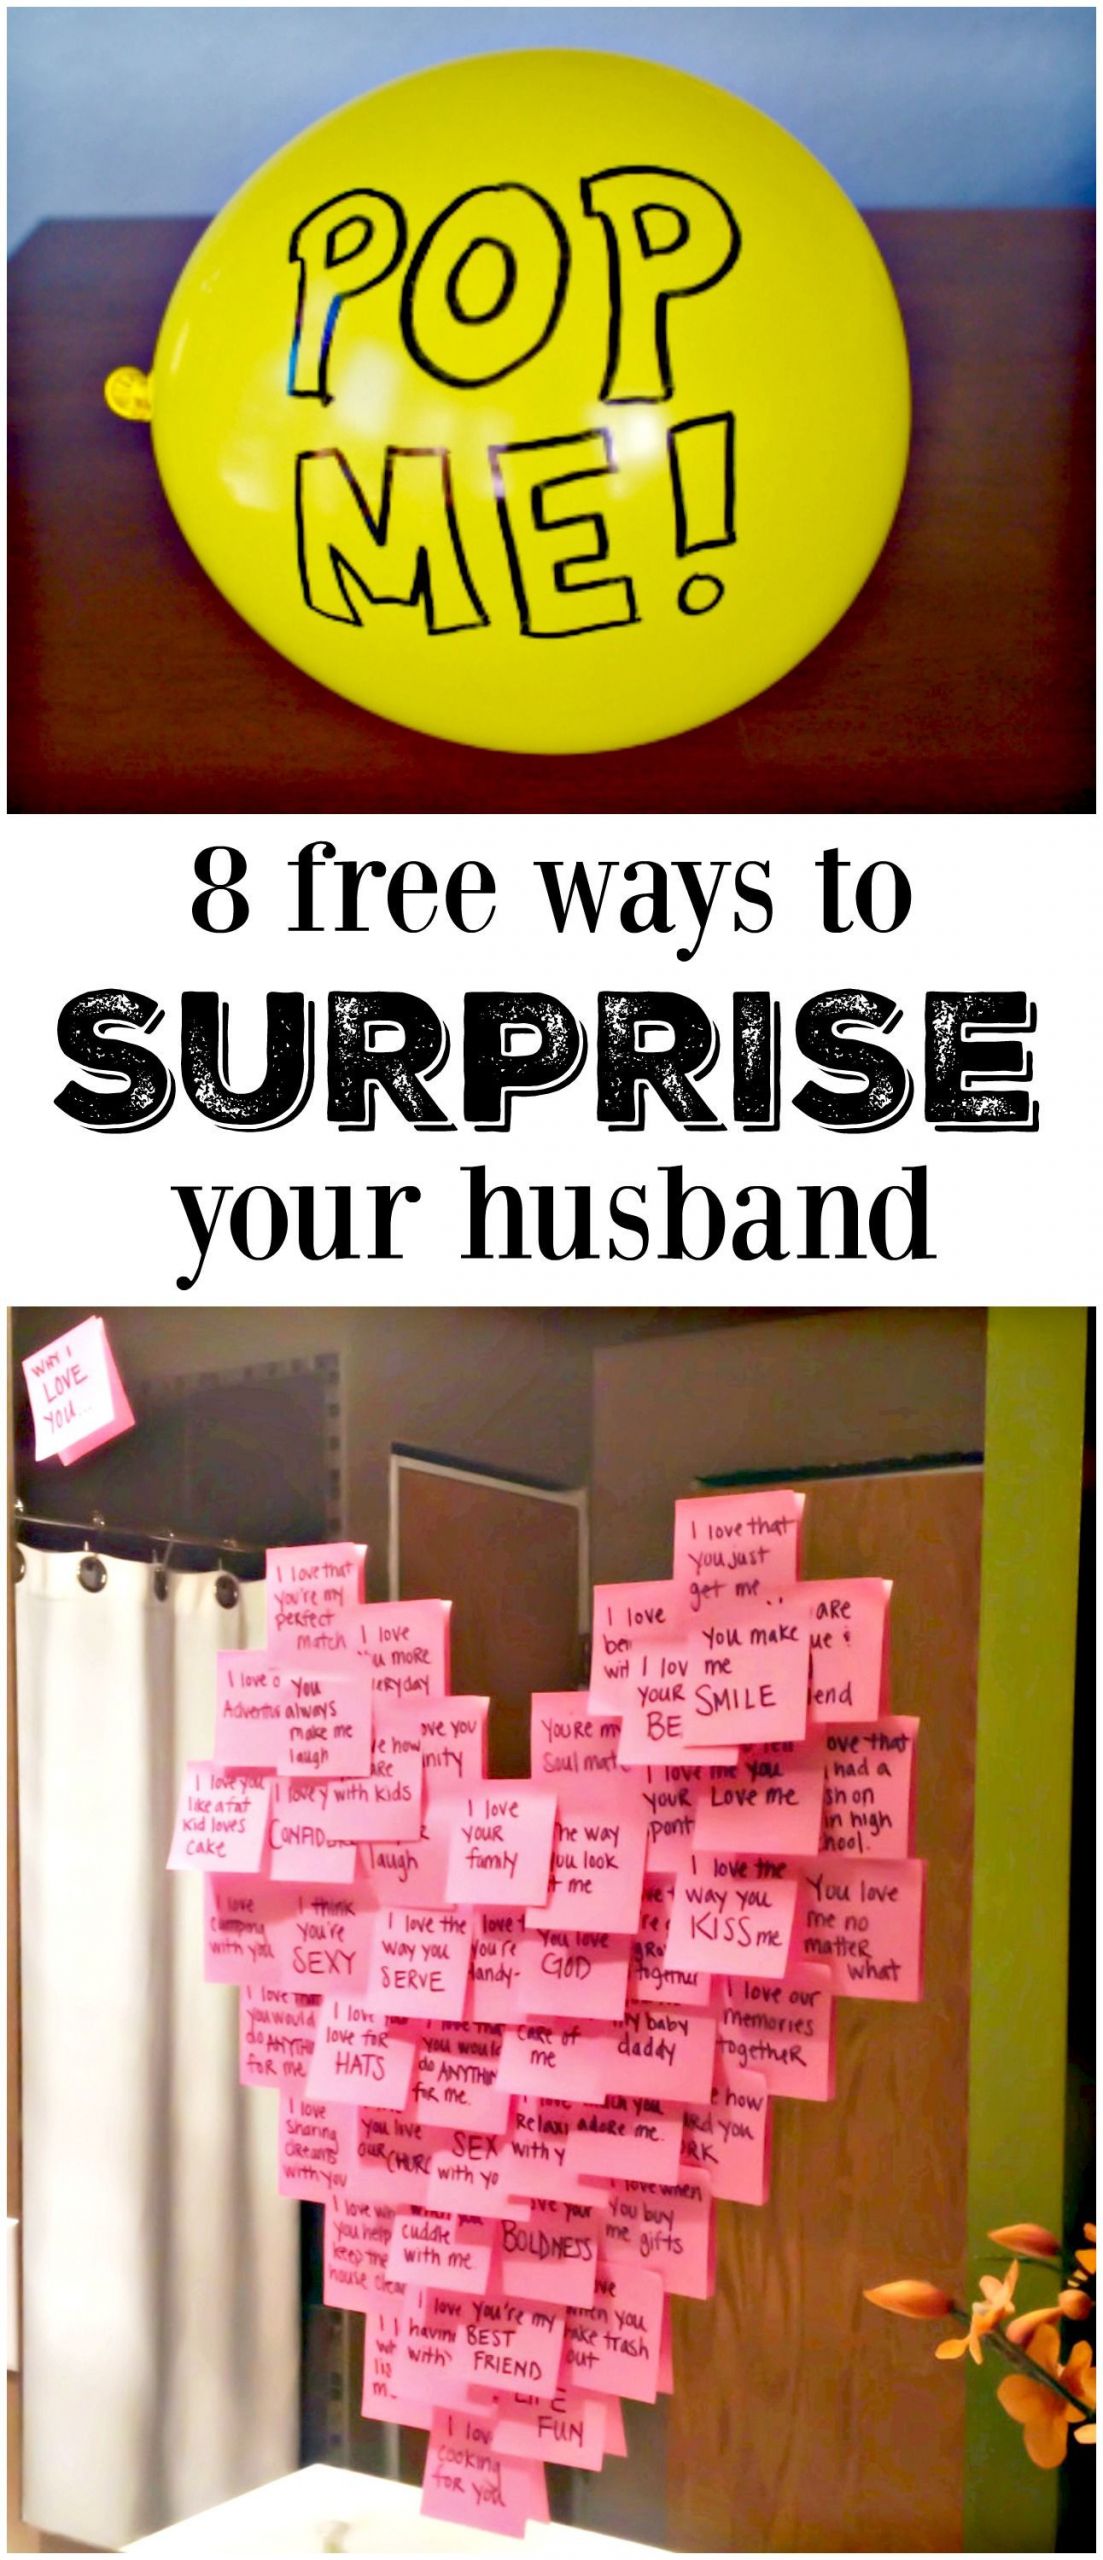 Valentines Gift Ideas For Your Husband
 8 Meaningful Ways to Make His Day